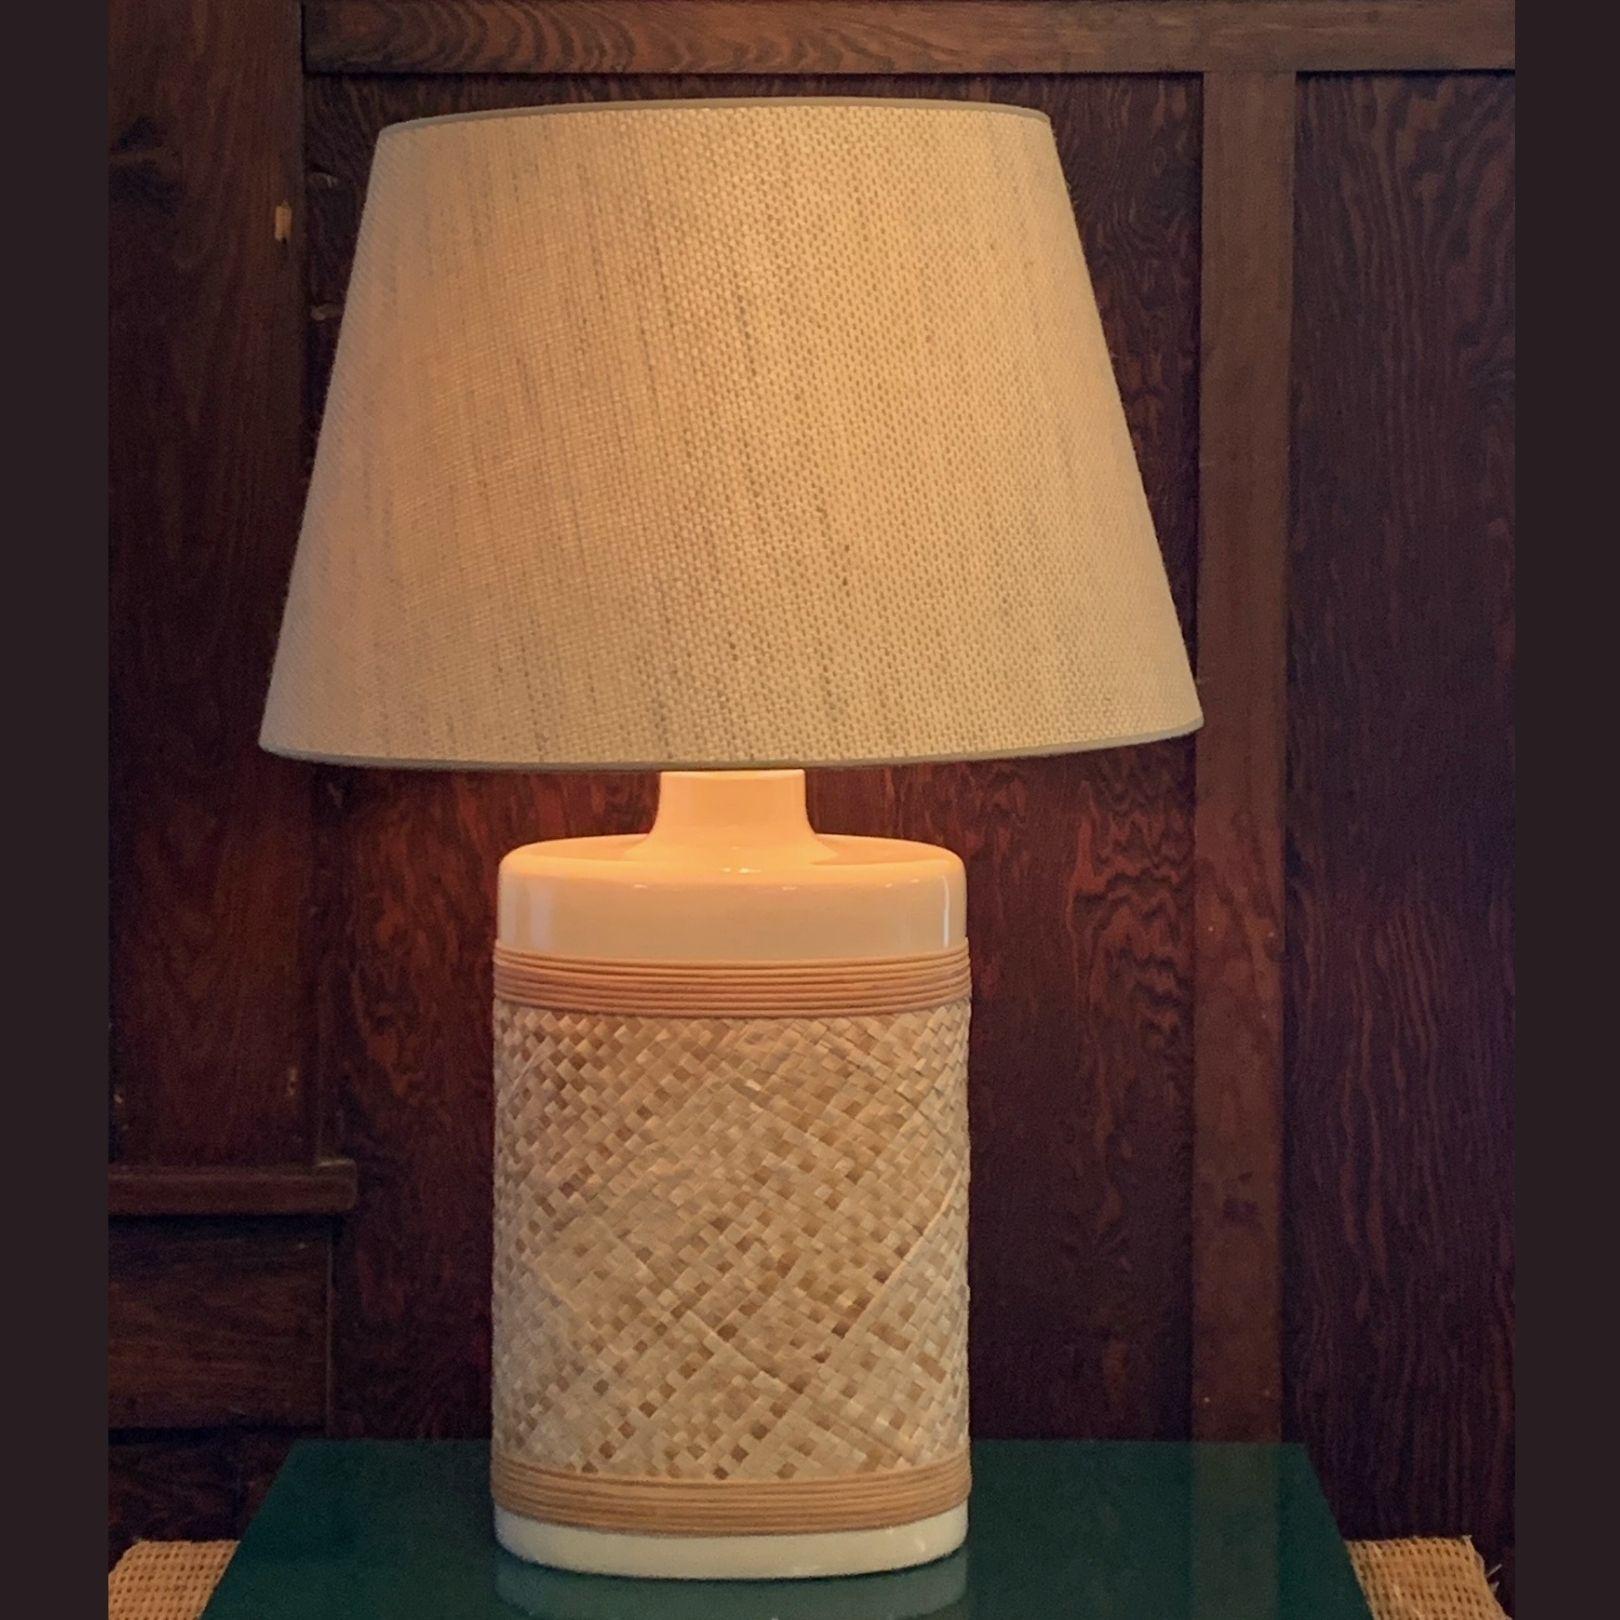 Set of Cream-colored Oval Ceramic Table Lamps with Natural Raffia Detail In Good Condition For Sale In Austin, TX